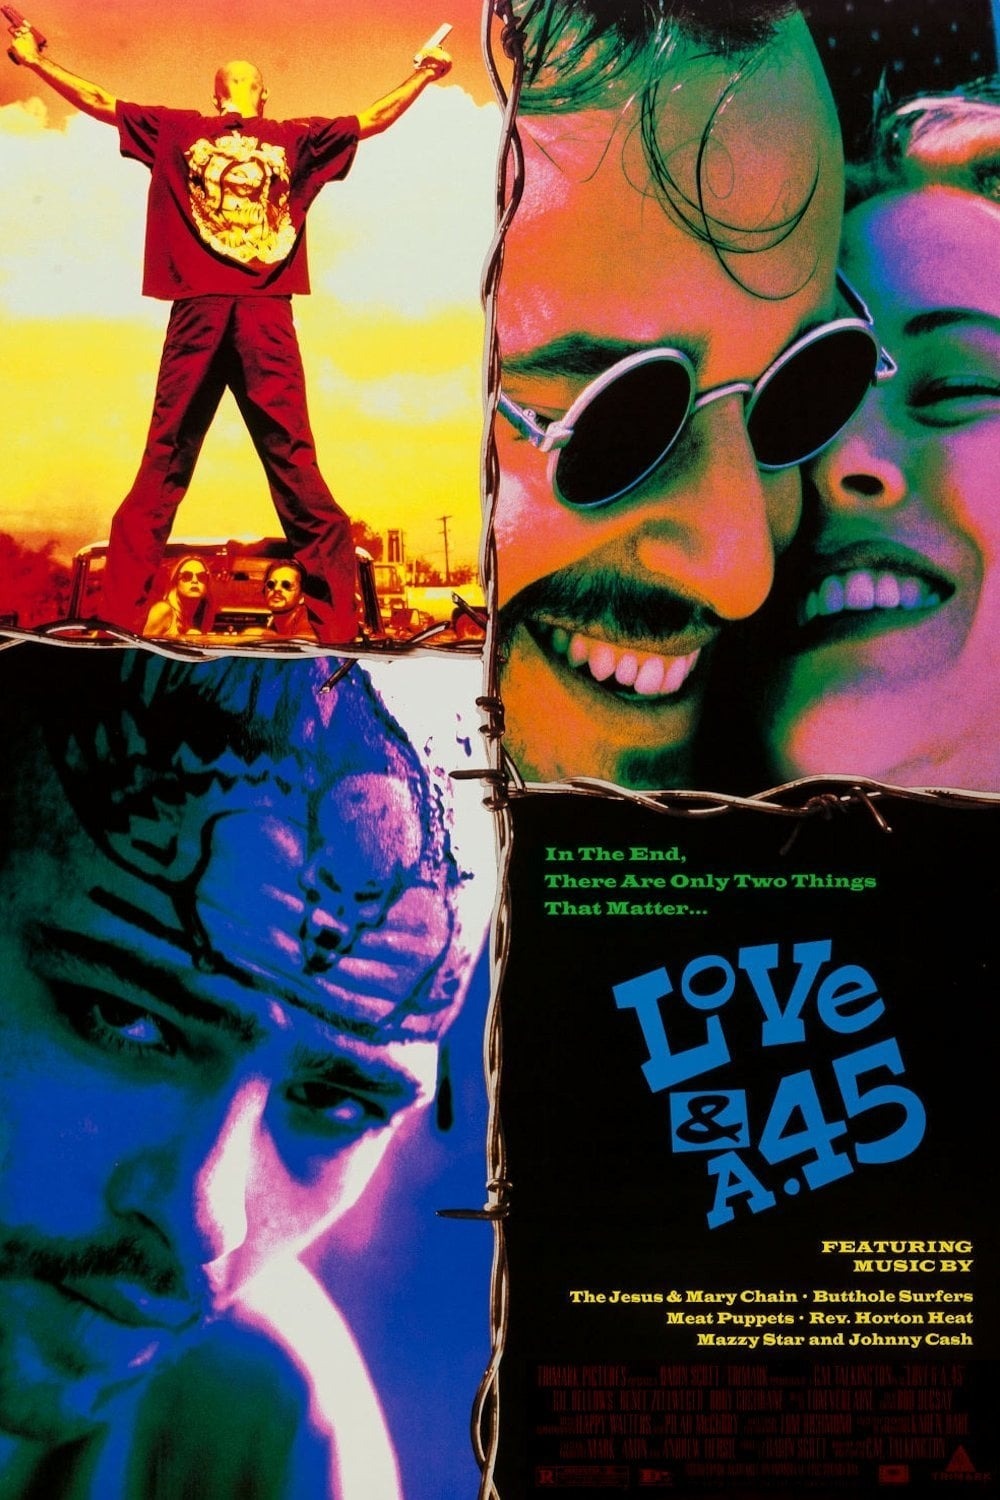 Extra Large Movie Poster Image for Love and a .45 